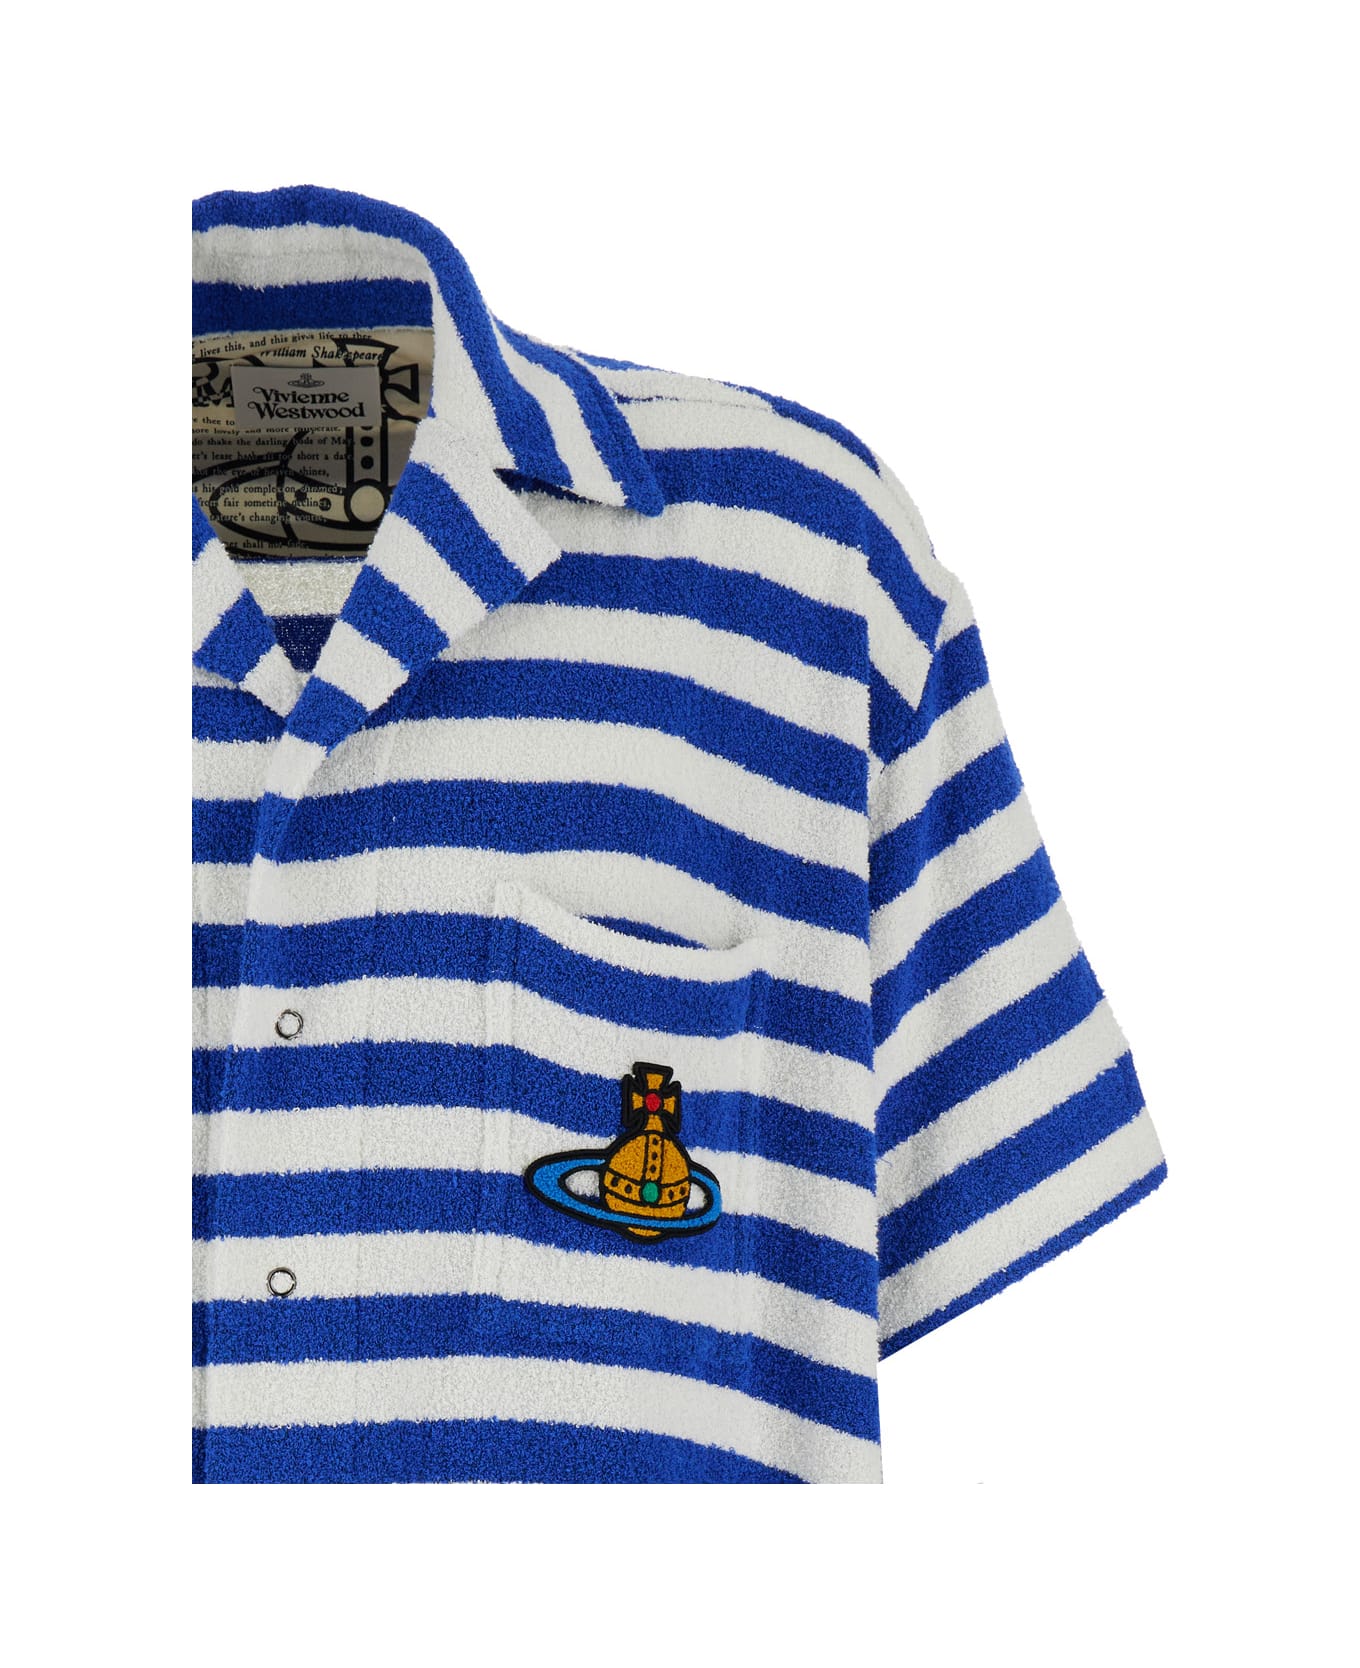 Vivienne Westwood Blue And White Striped Bowling Shirt With Orb Embroidery In Cotton Blend Man - WHITE シャツ